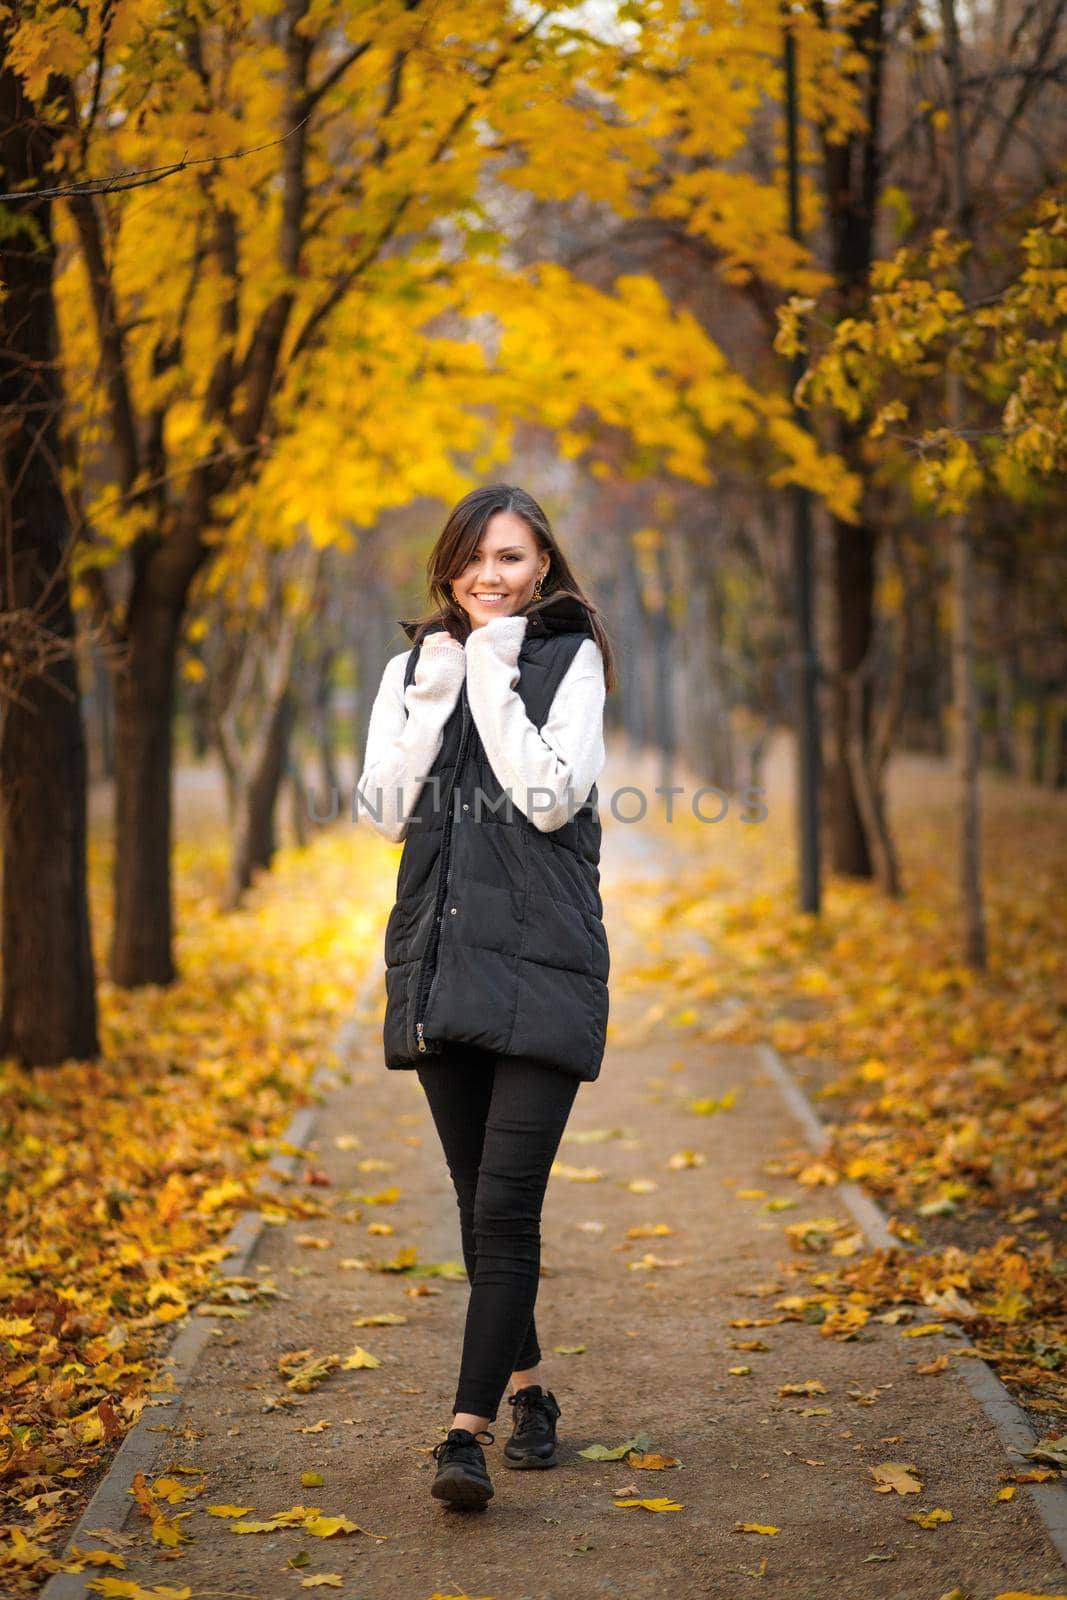 A young woman in autumn clothes walks in an autumn park with picturesque autumn foliage.